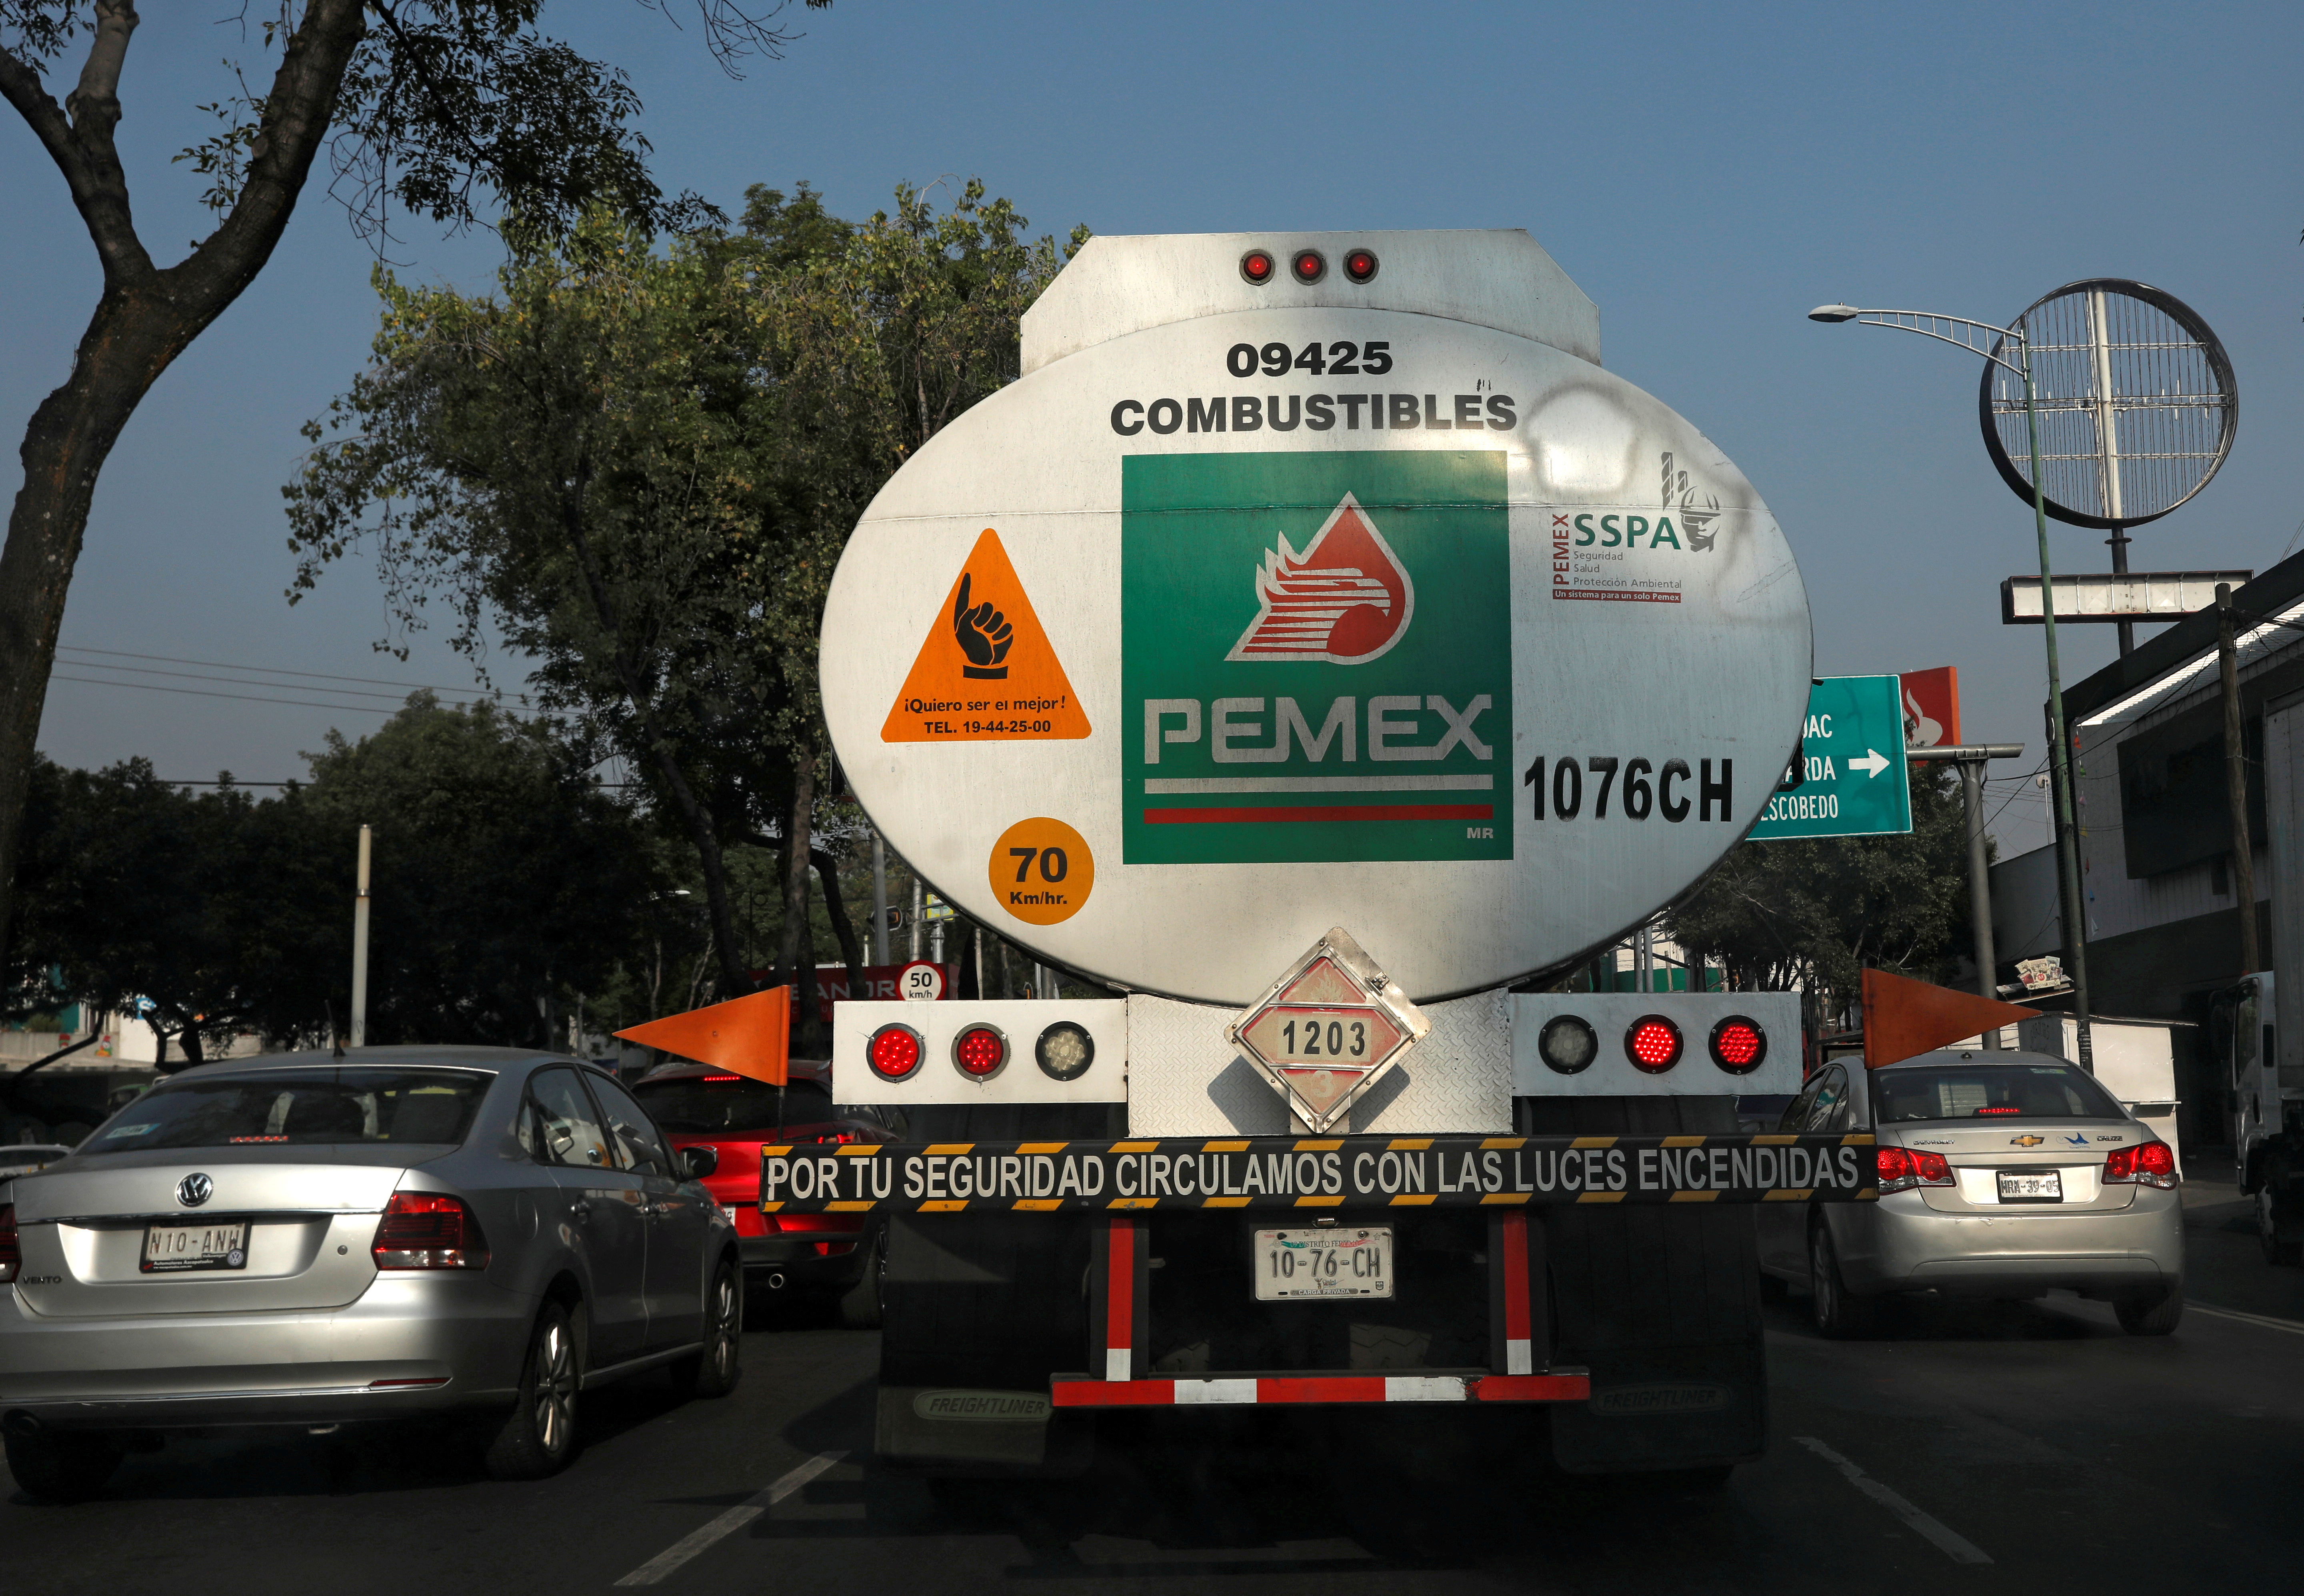 FILE PHOTO: A tanker truck transporting fuel is pictured along the streets en route to a gas station, in Mexico City, Mexico January 15, 2019. REUTERS/Henry Romero/File Photo